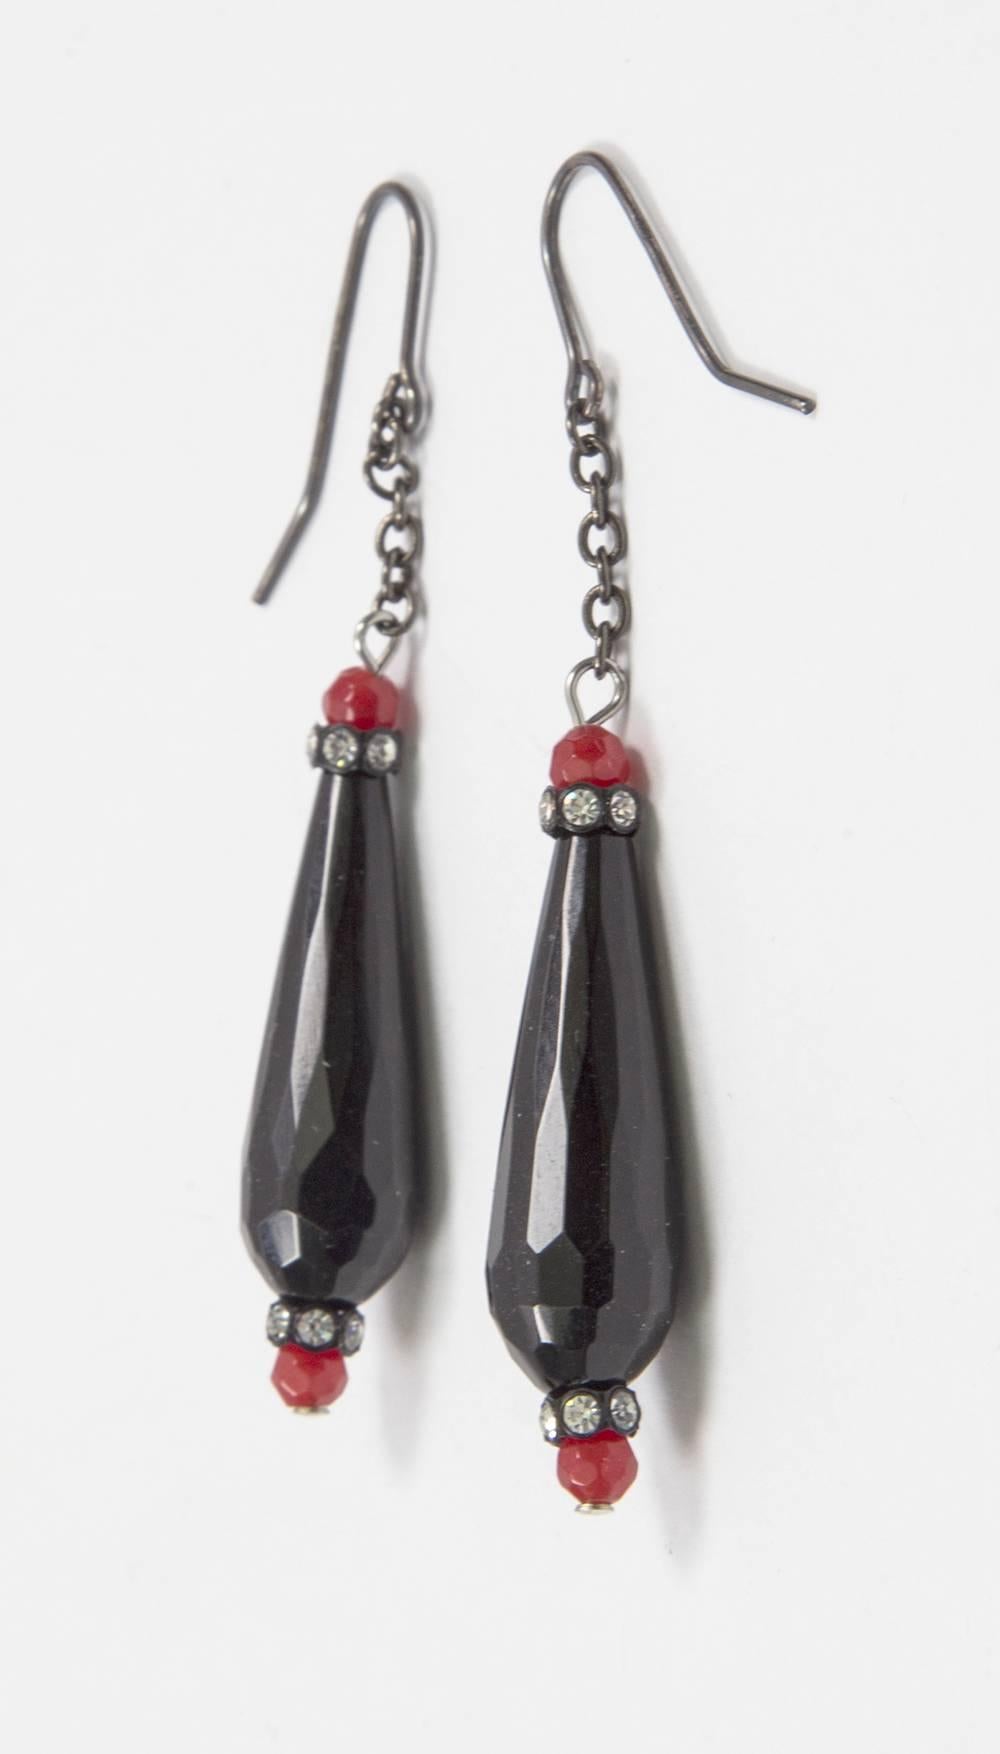 Soft faceted sheen Black Jet Dangle Earrings accented by faceted red and Sparkling CZ stones, each suspending a faceted elongated teardrop shaped Jet glass bead, measuring approx. 1.5” each in length; approx. length of earrings: 3”. Chic and